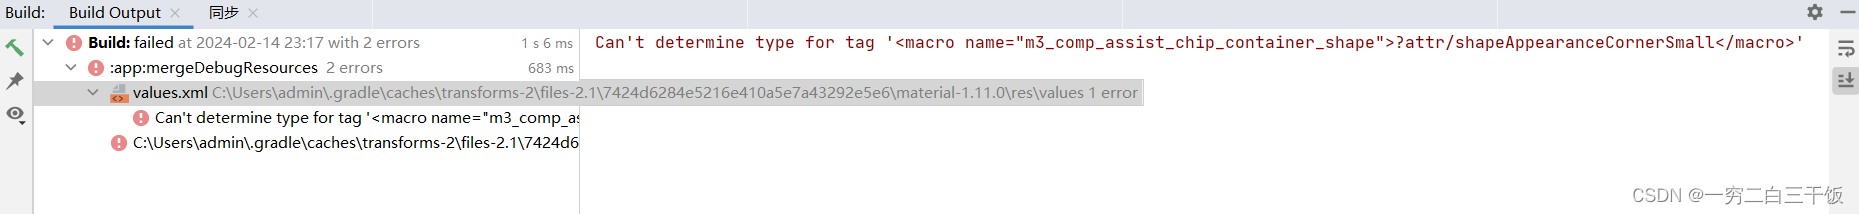 Android studio报错：Can‘t determine type for tag ‘＜macro name=“m3